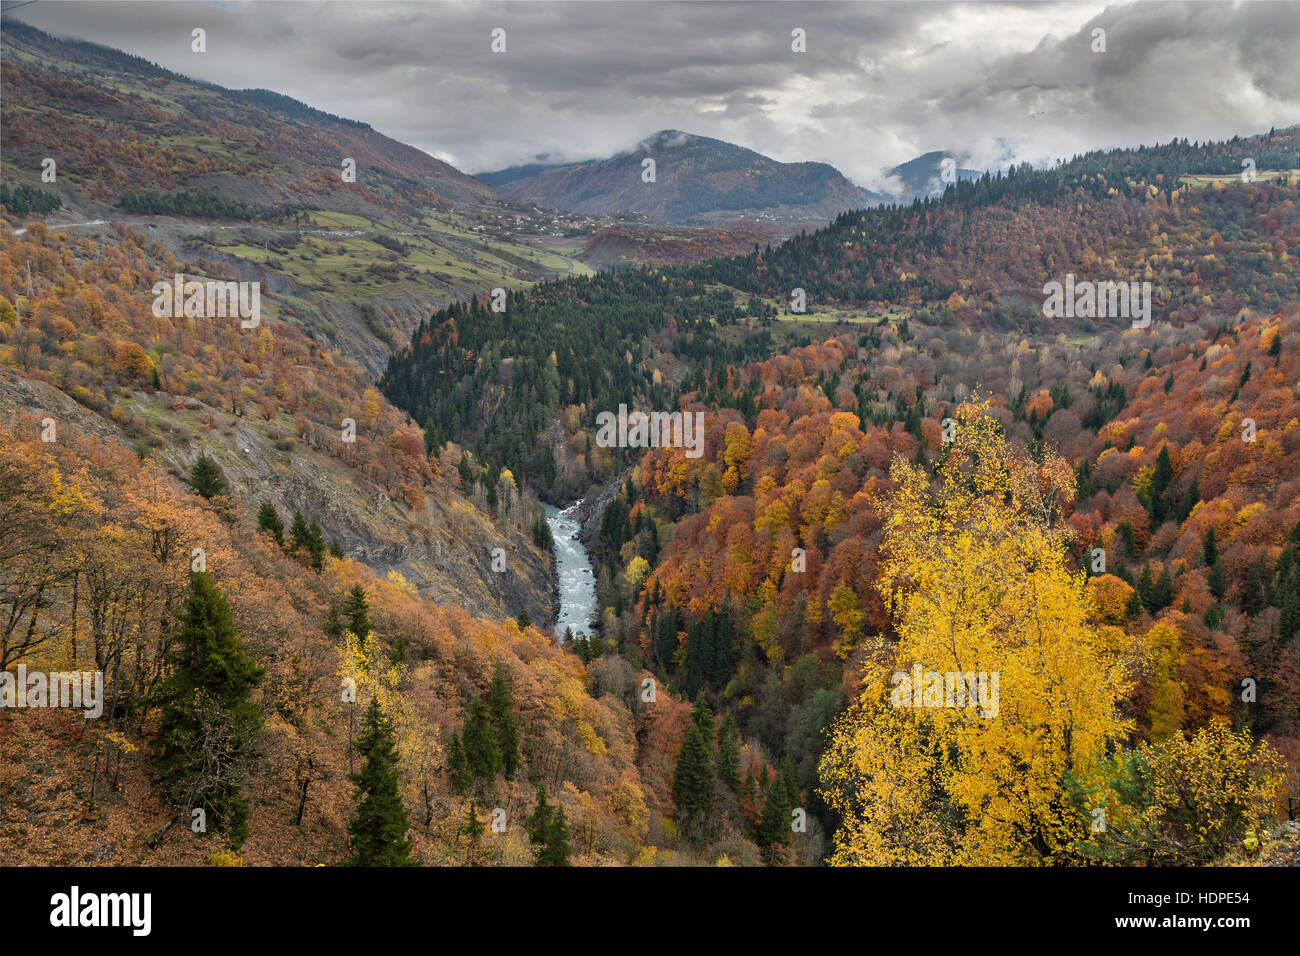 Fall colors in the Caucasus Mountains in Georgia Stock Photo